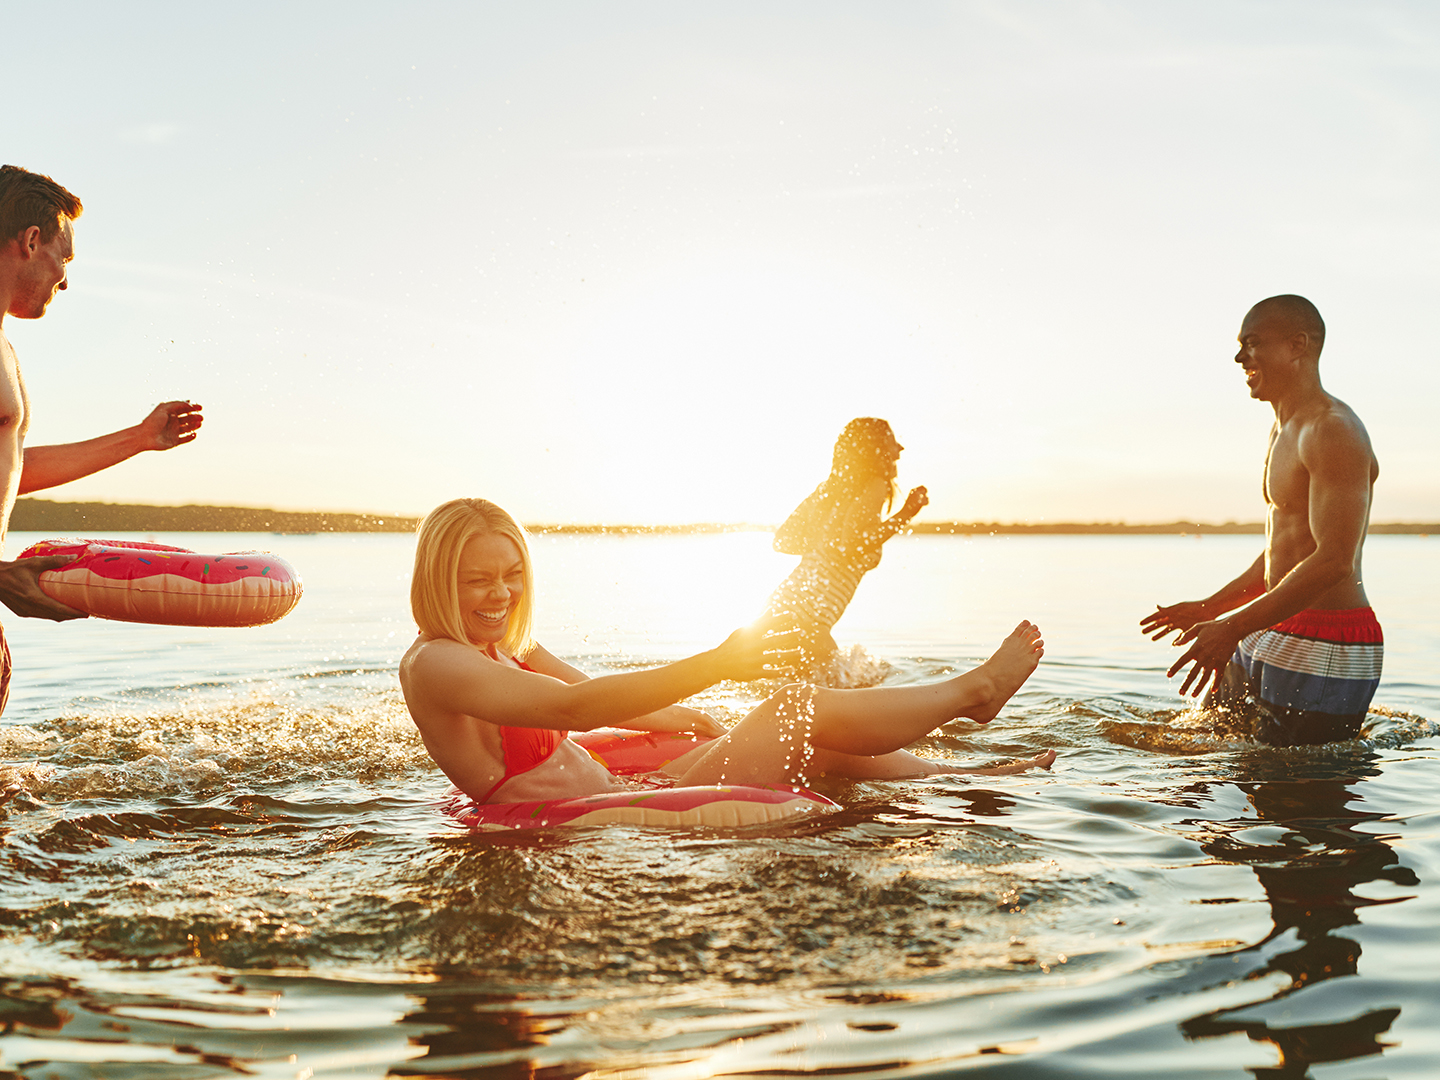 Diverse group of young friends in swimsuits laughing and splashing each other while having fun together in a lake at sunset